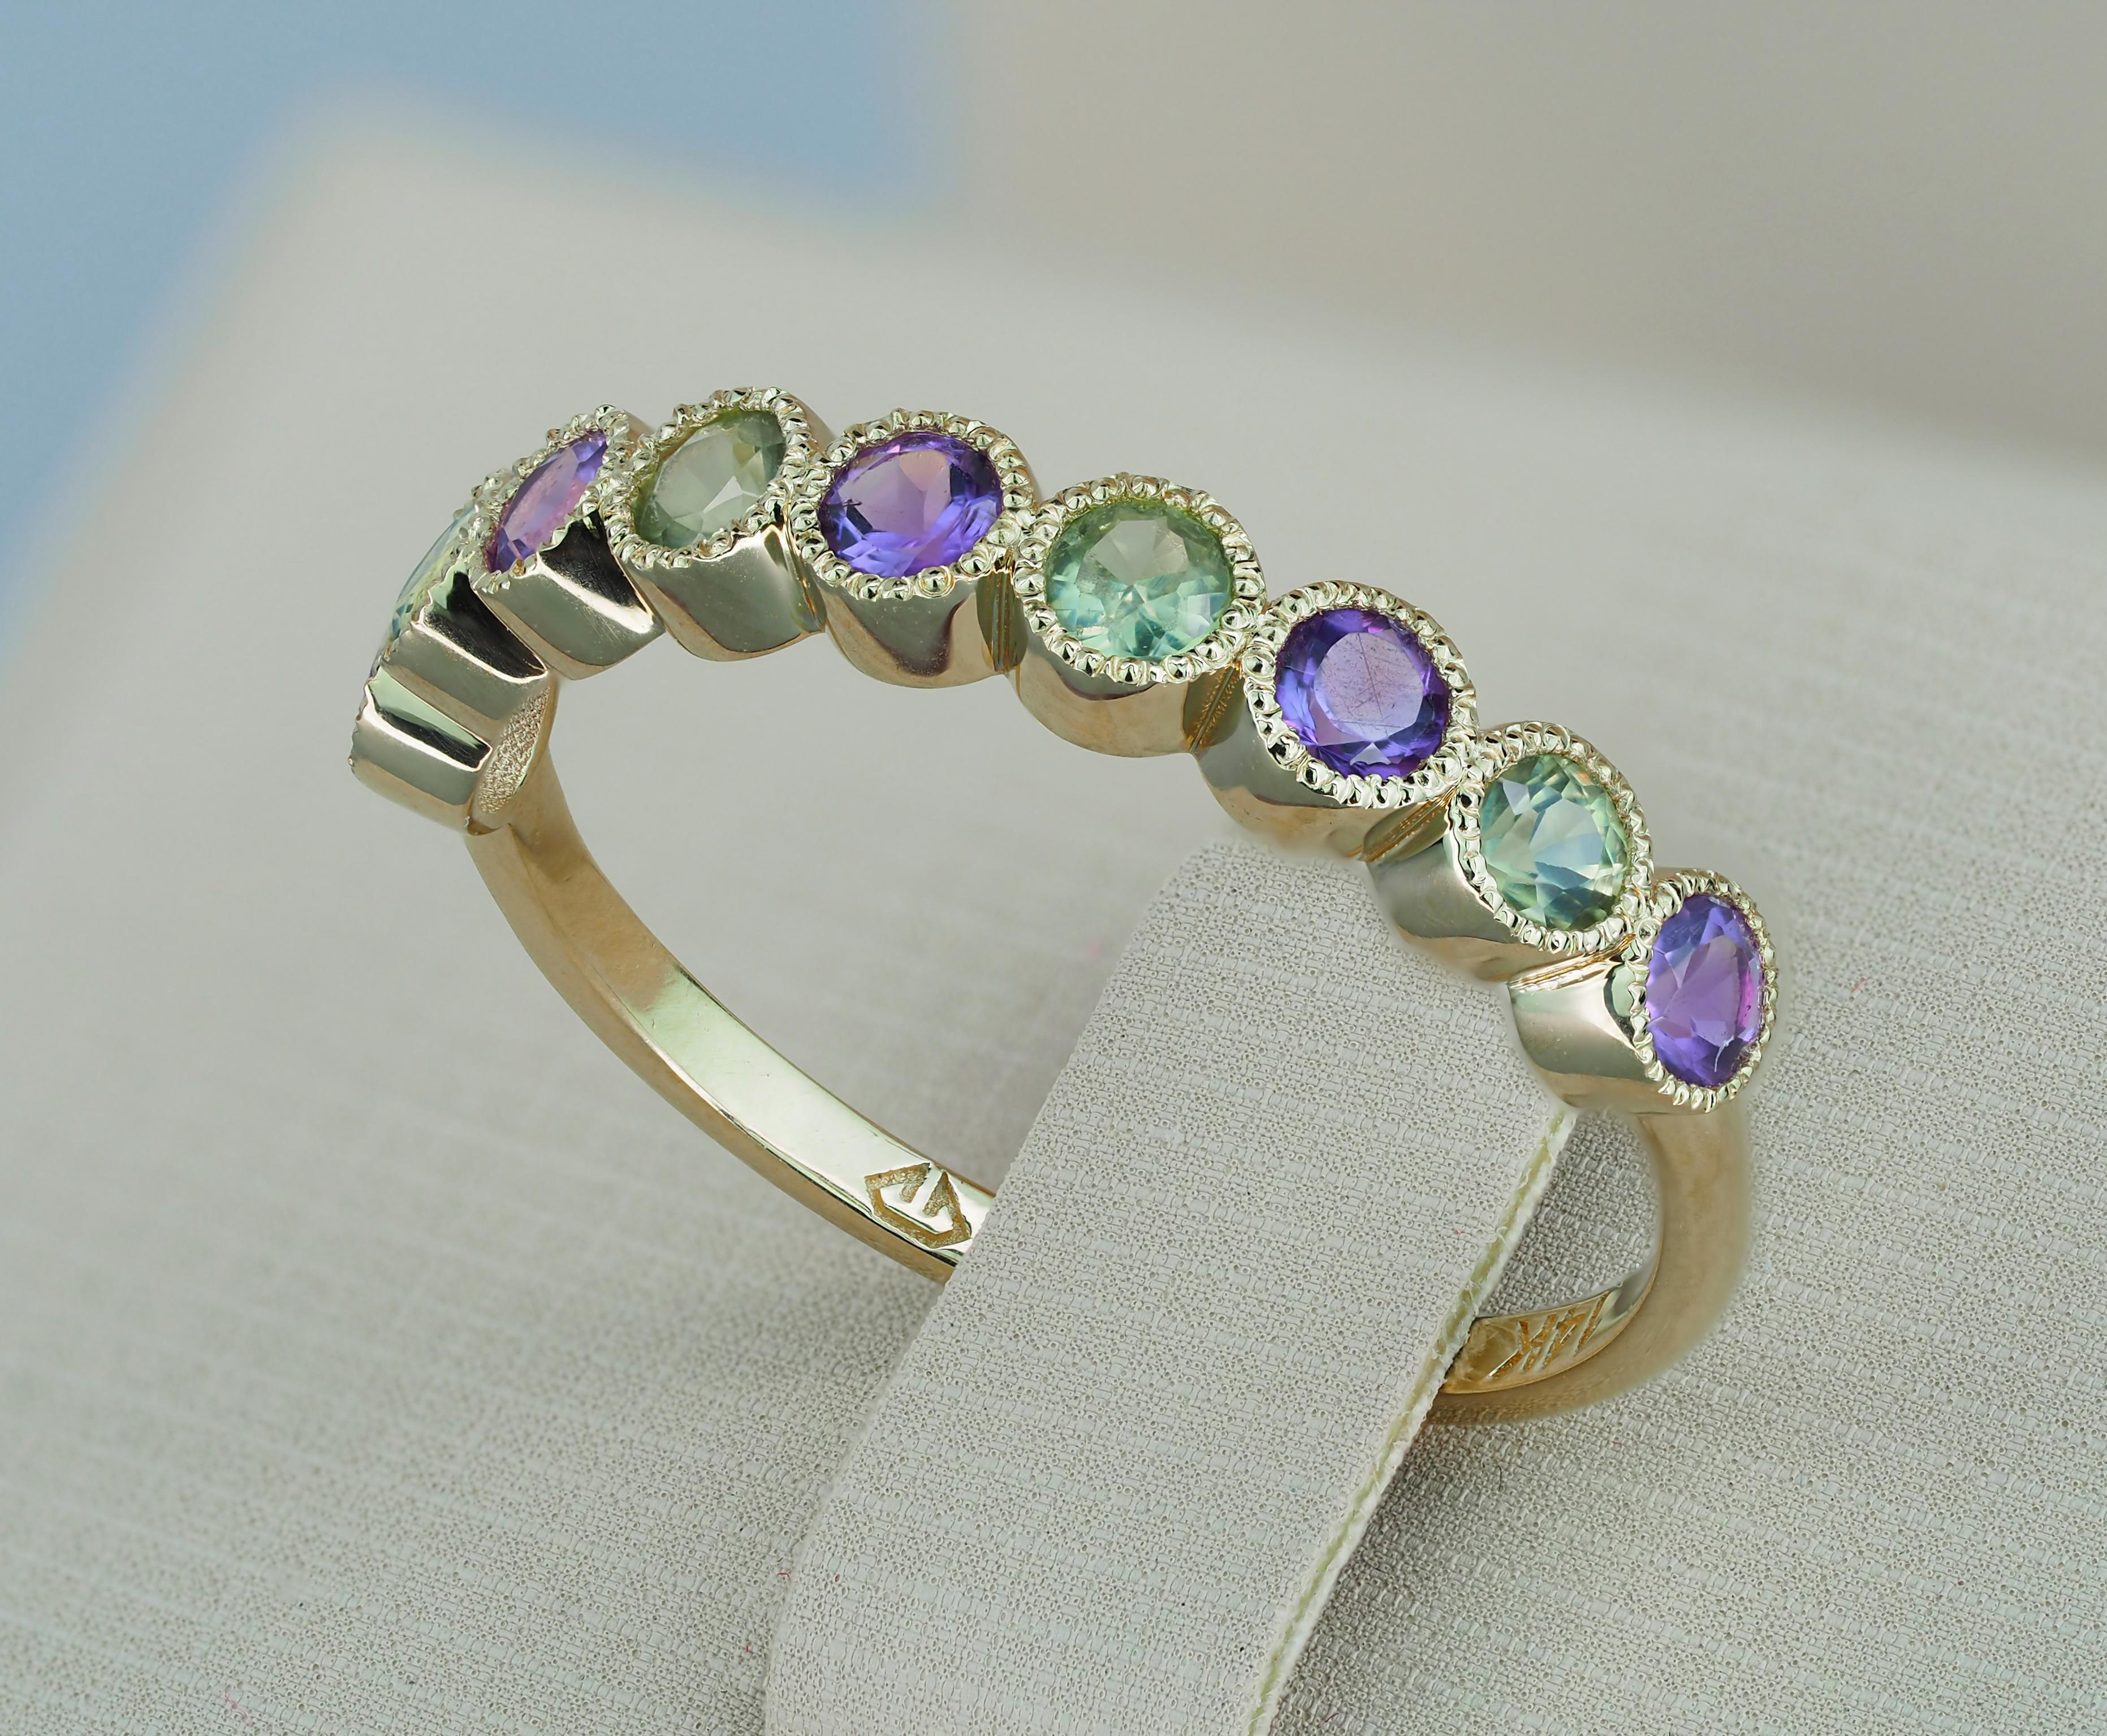 Green Sapphire, Amethyst Pave 14k gold half eternity Band.
Amethyst, sapphire Stacking Ring. 2 Birthstone Anniversary Ring.
Amethyst, sapphire Semi Eternity Ring Band. Amethyst, sapphire 14k gold ring. Round amethyst, sapphire ring. Half Eternity